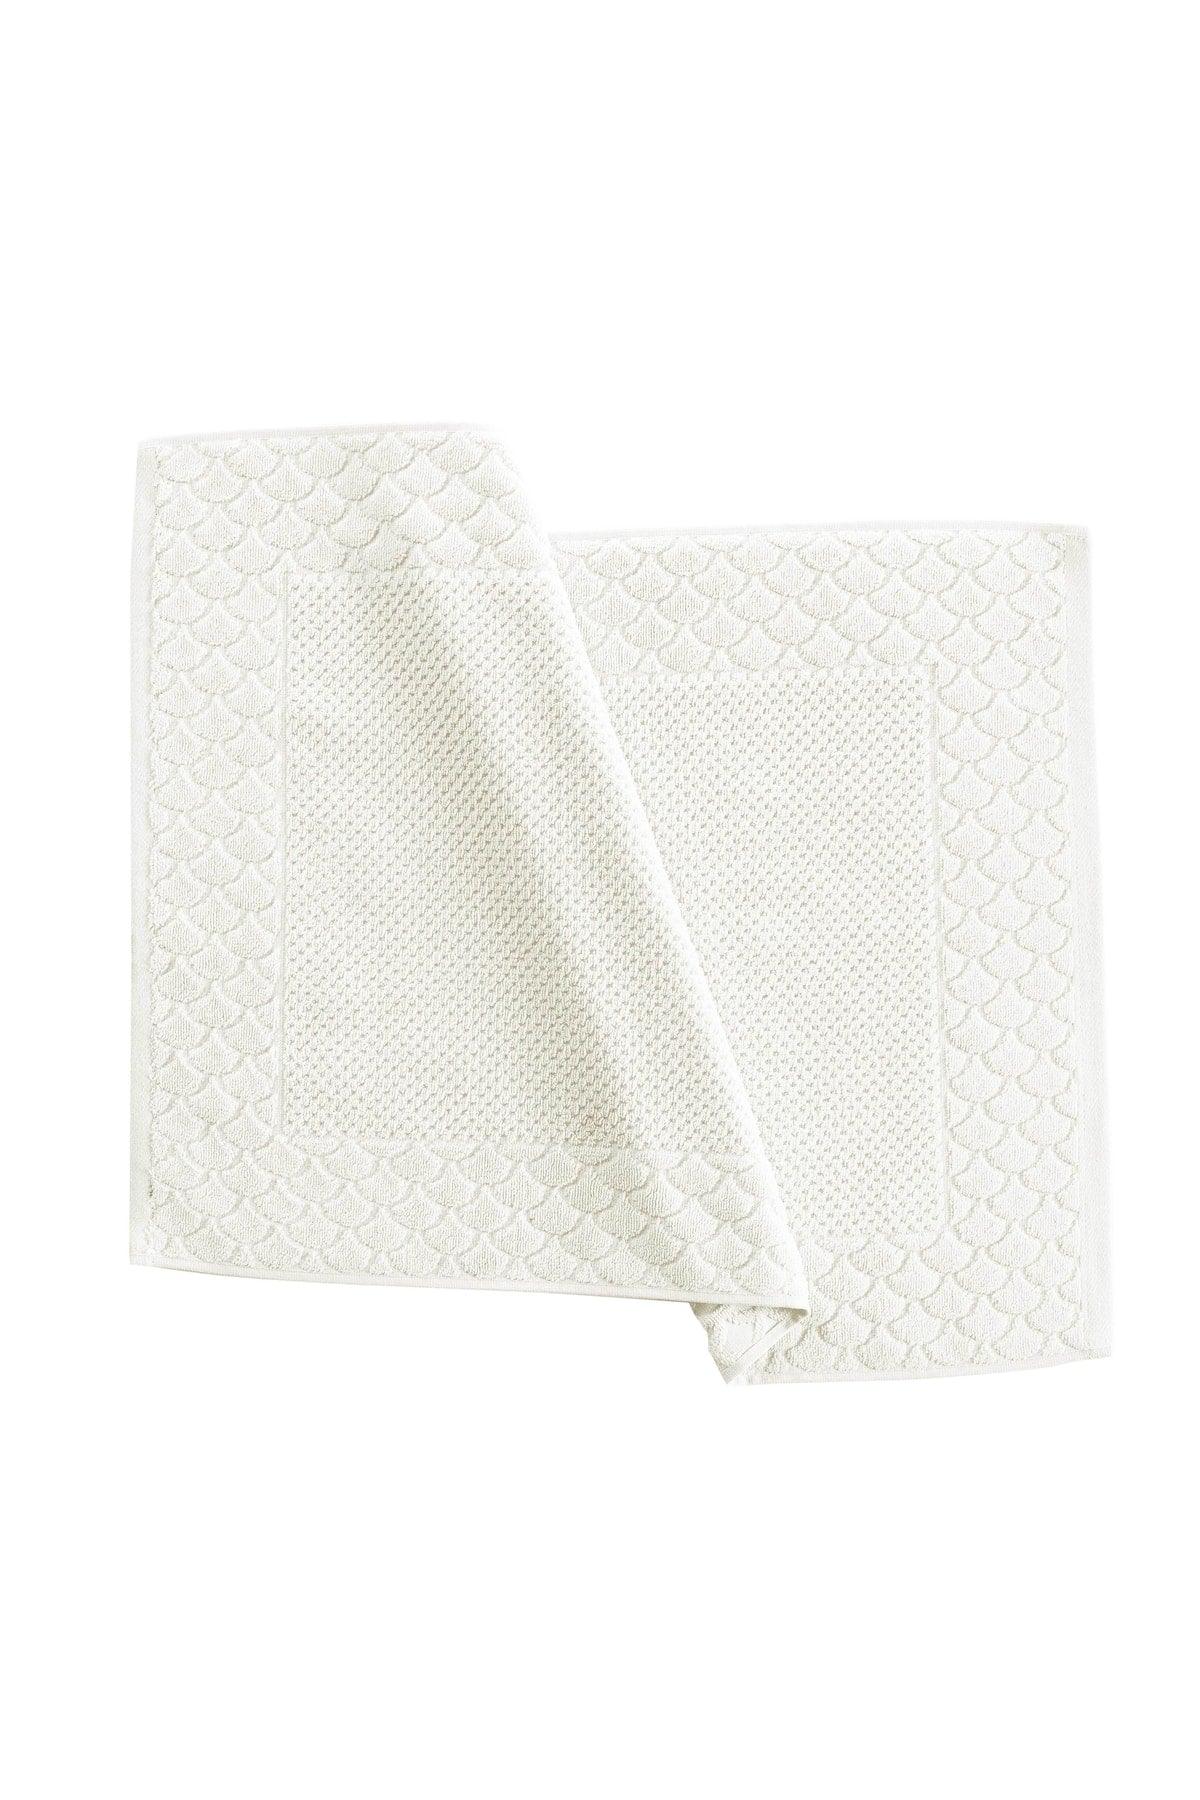 | Alana | Extra Soft Cotton Rice Knitted Foot Towel - Swordslife